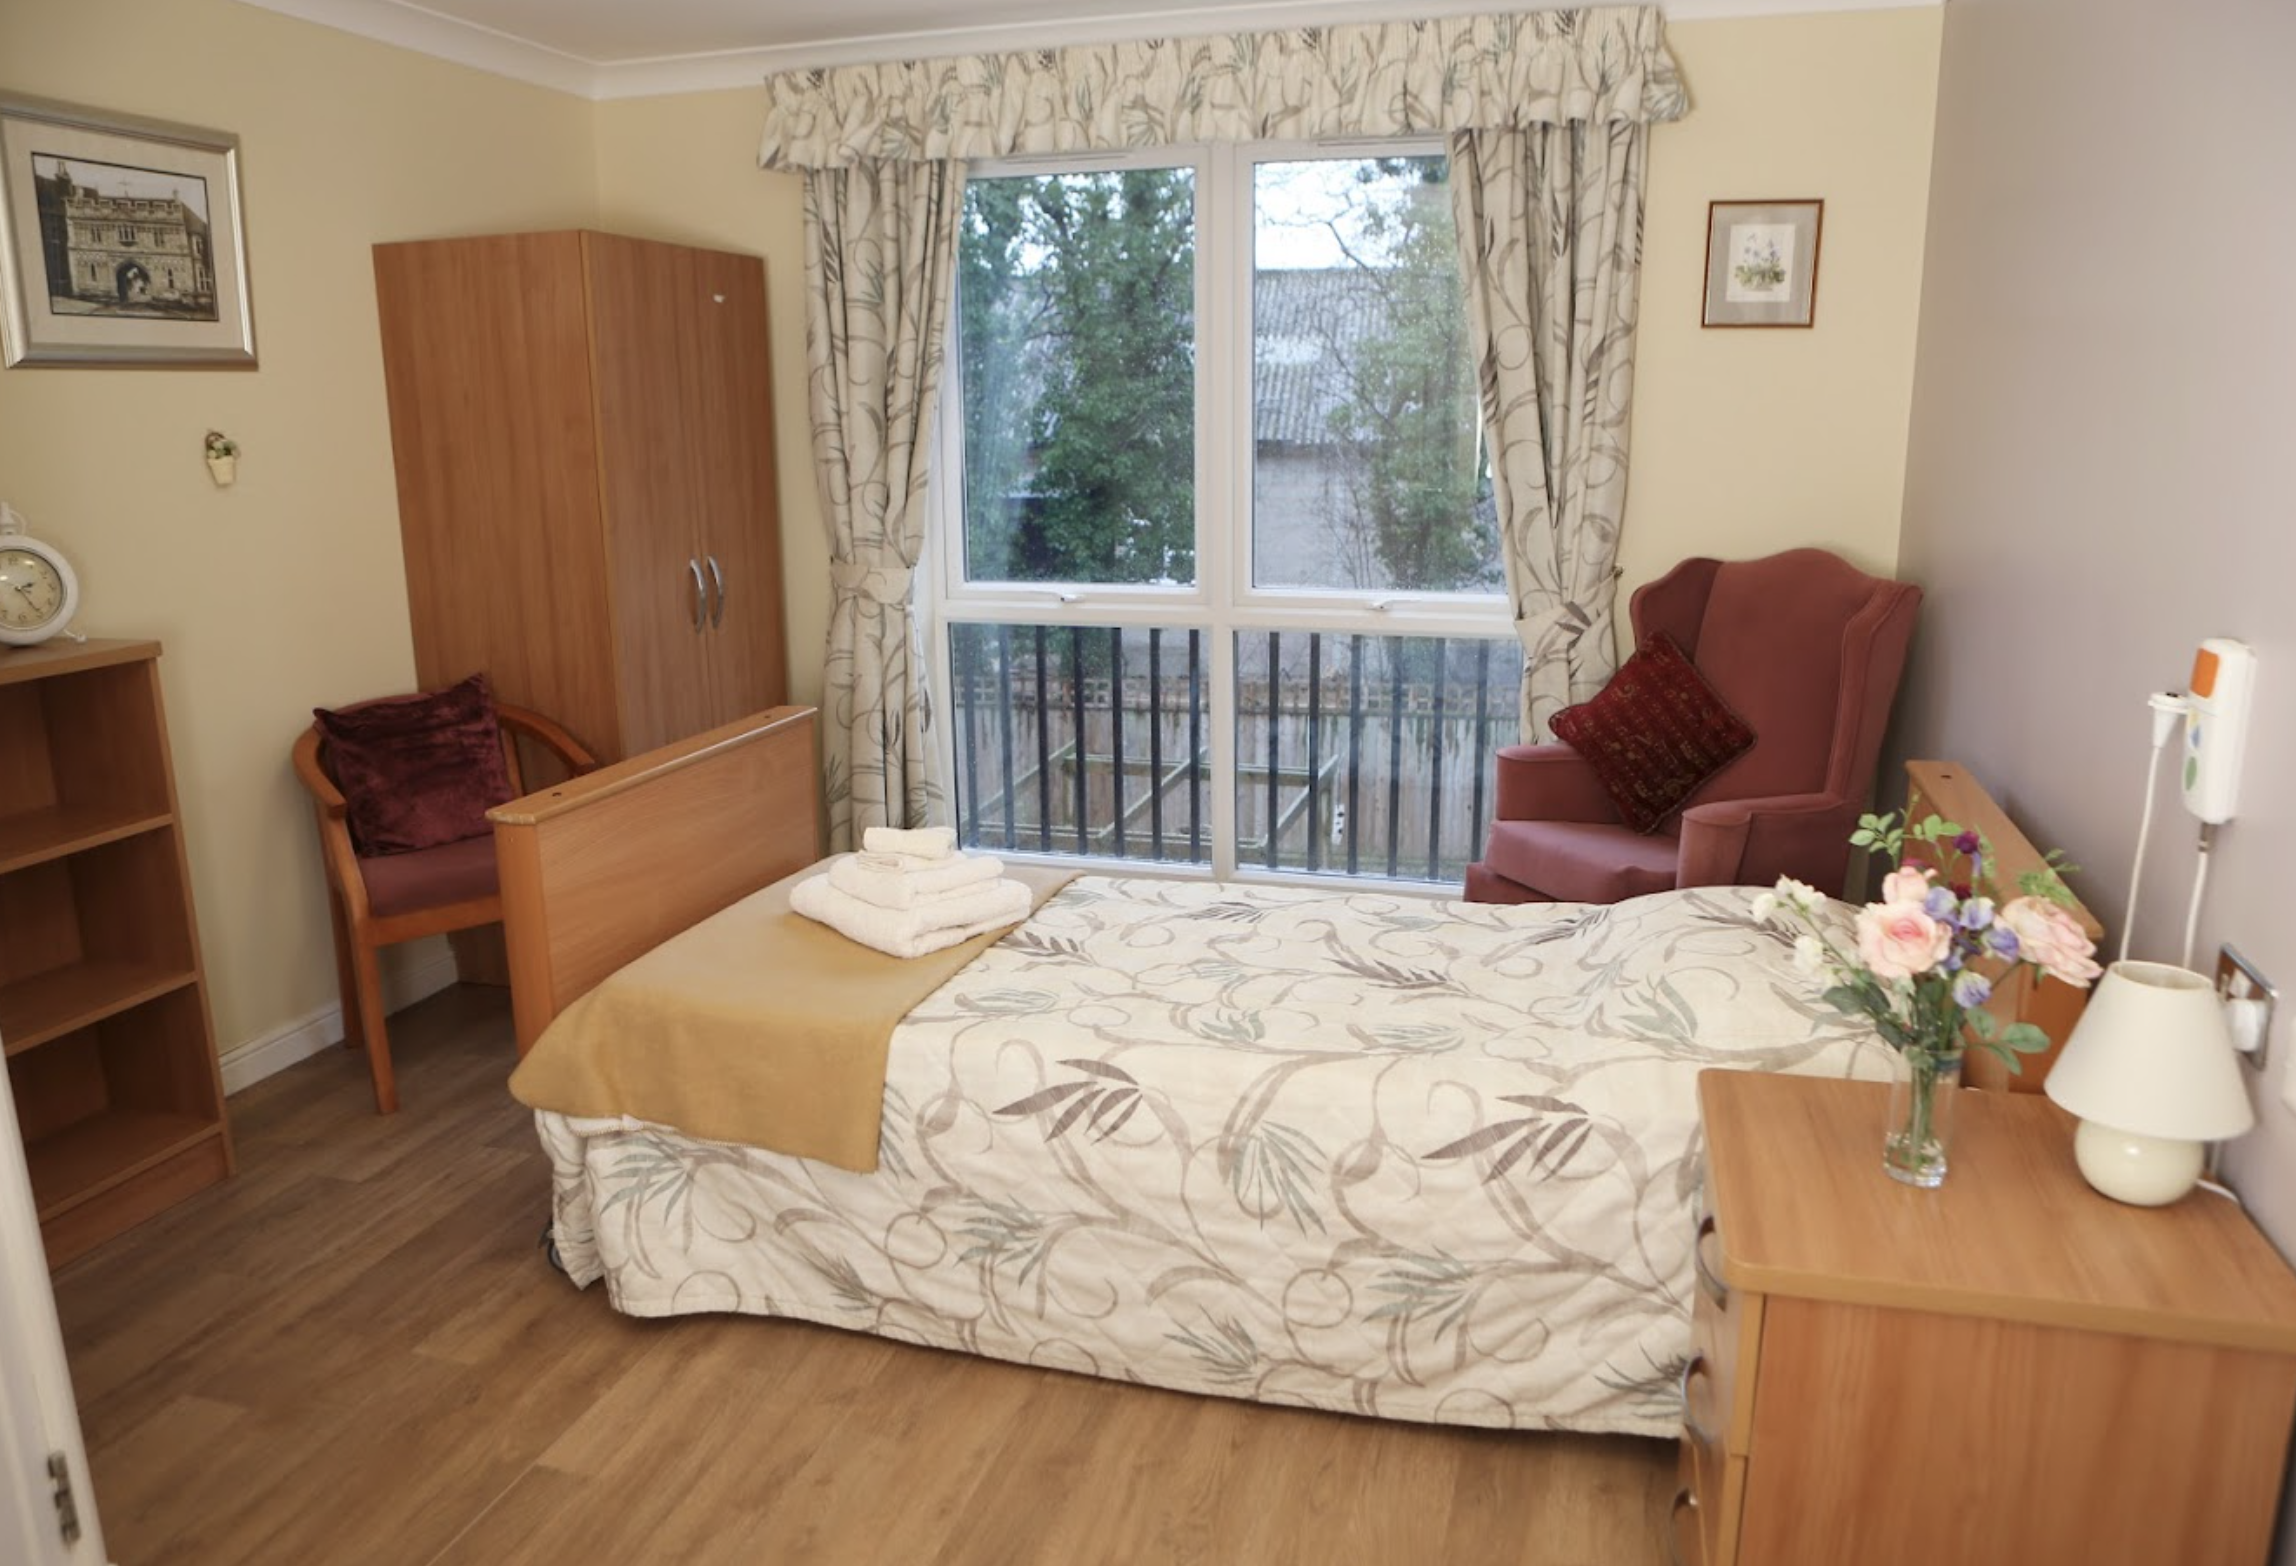 Bedroom of The Springs care home in Malvern, Worcestershire